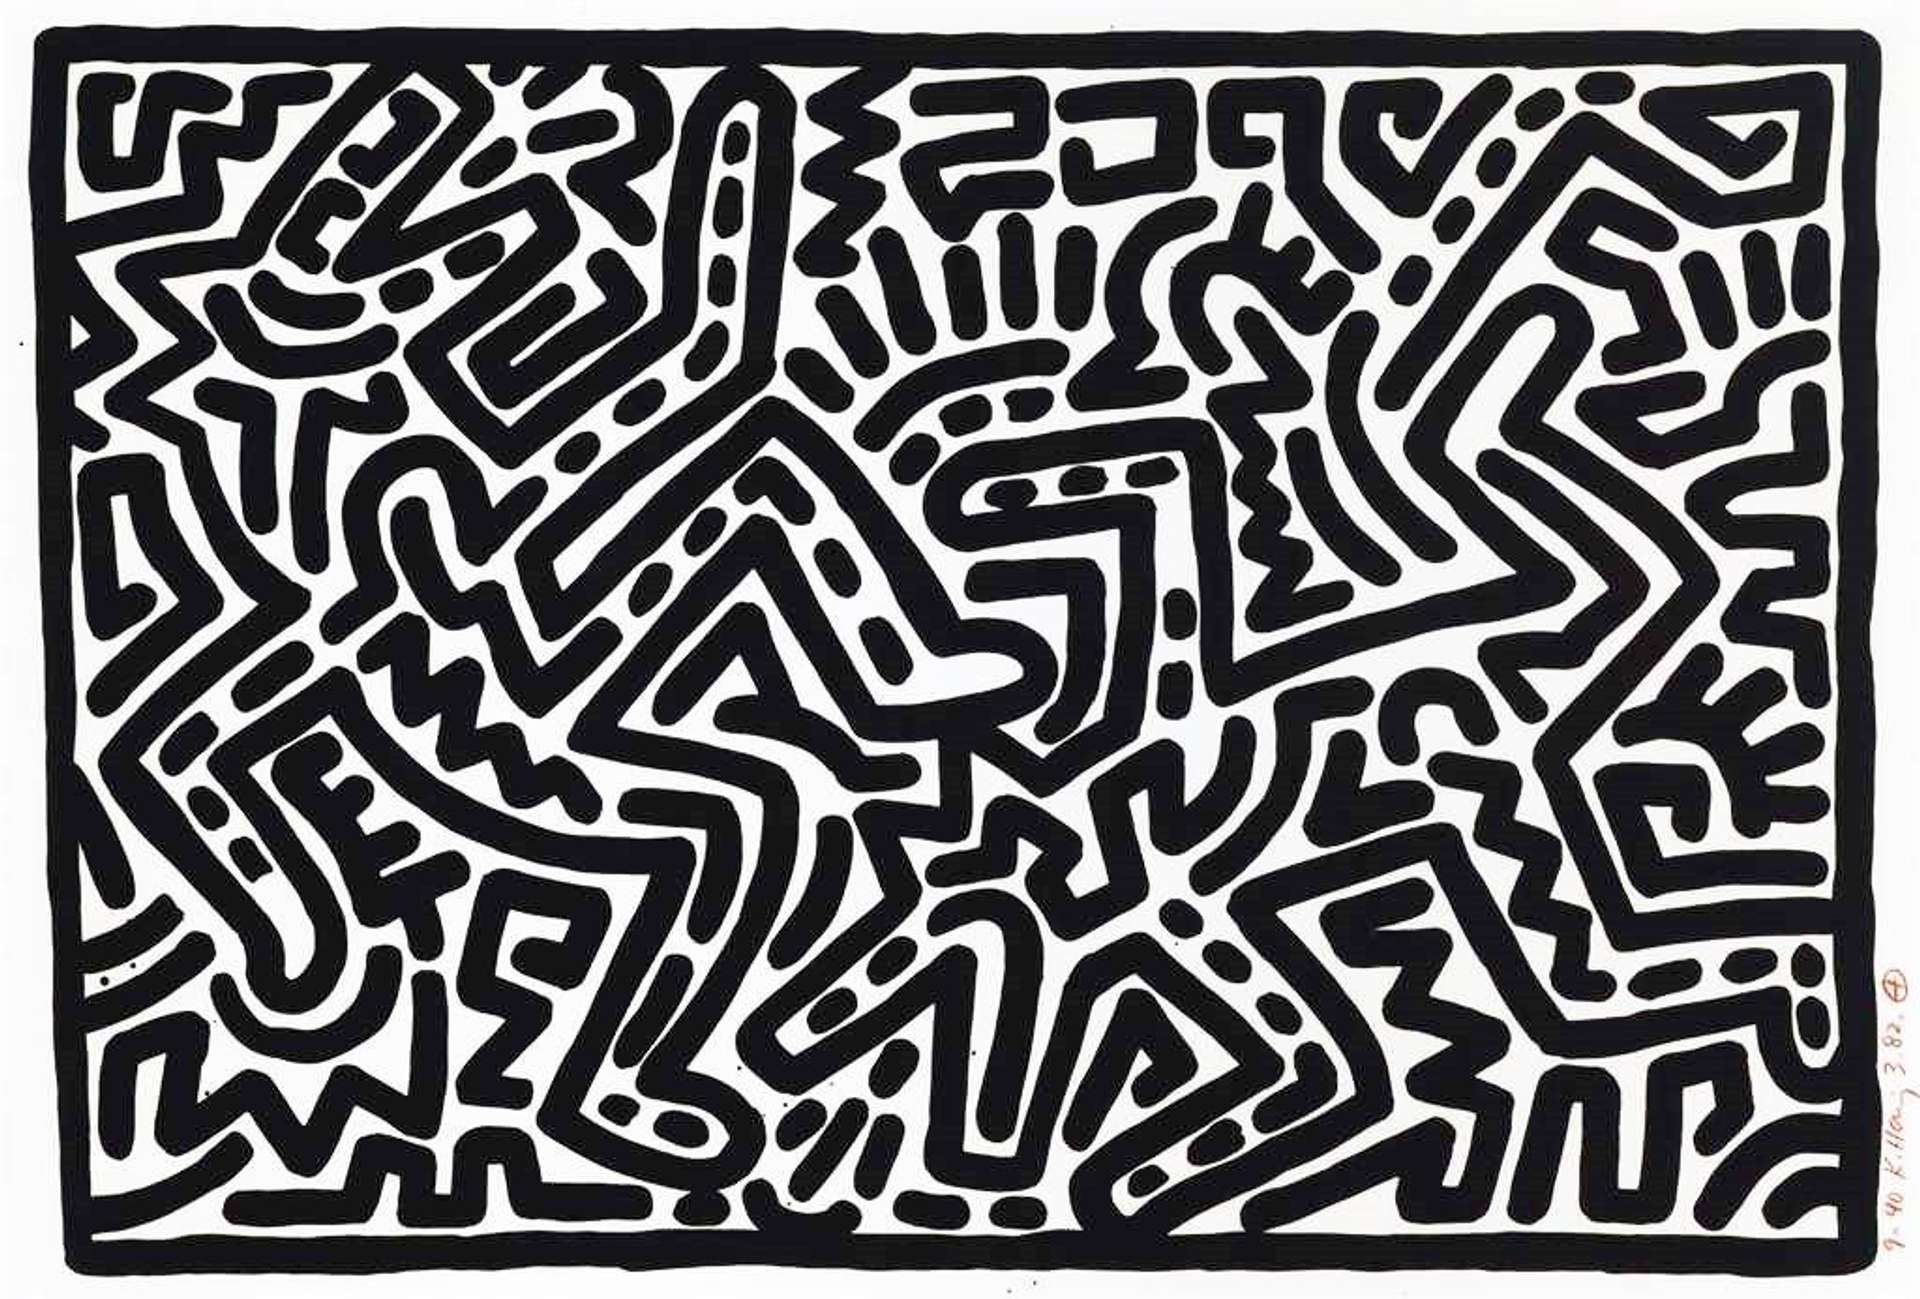 Plate V, Untitled 1 - 6 - Signed Print by Keith Haring 1982 - MyArtBroker